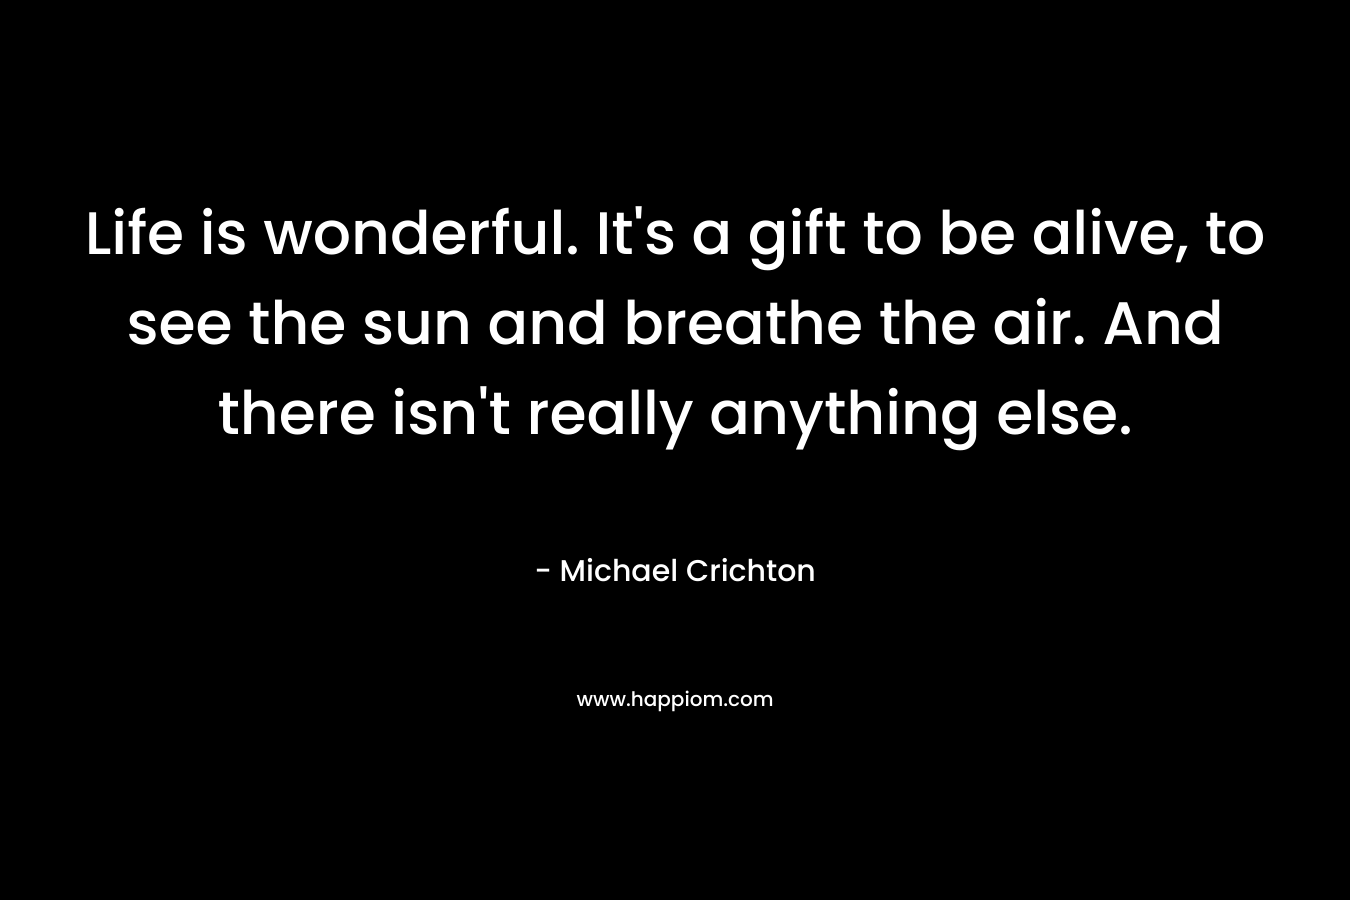 Life is wonderful. It's a gift to be alive, to see the sun and breathe the air. And there isn't really anything else.